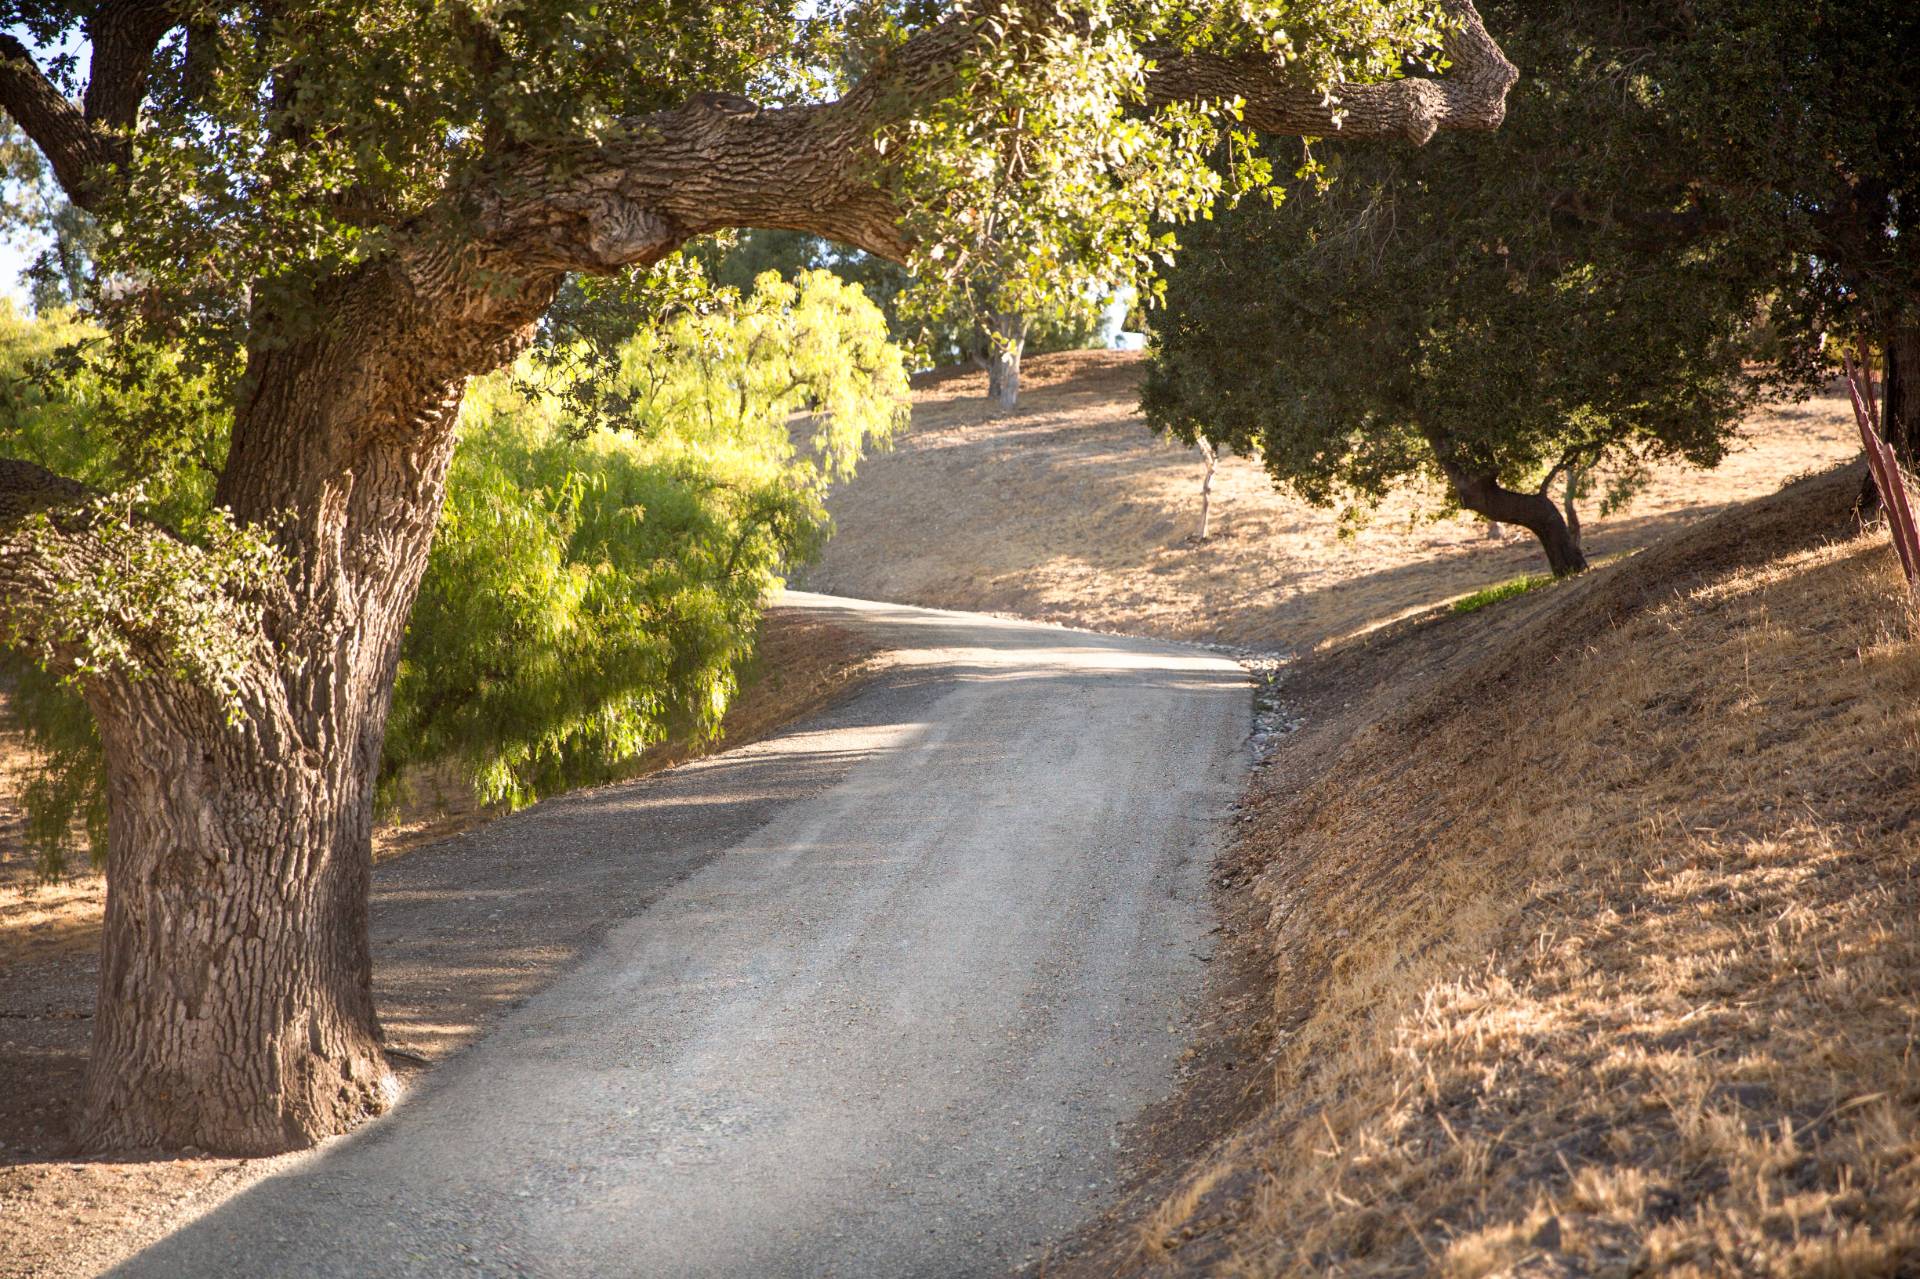 The road GPM completed a residential chip seal project on in Santa Ynez.